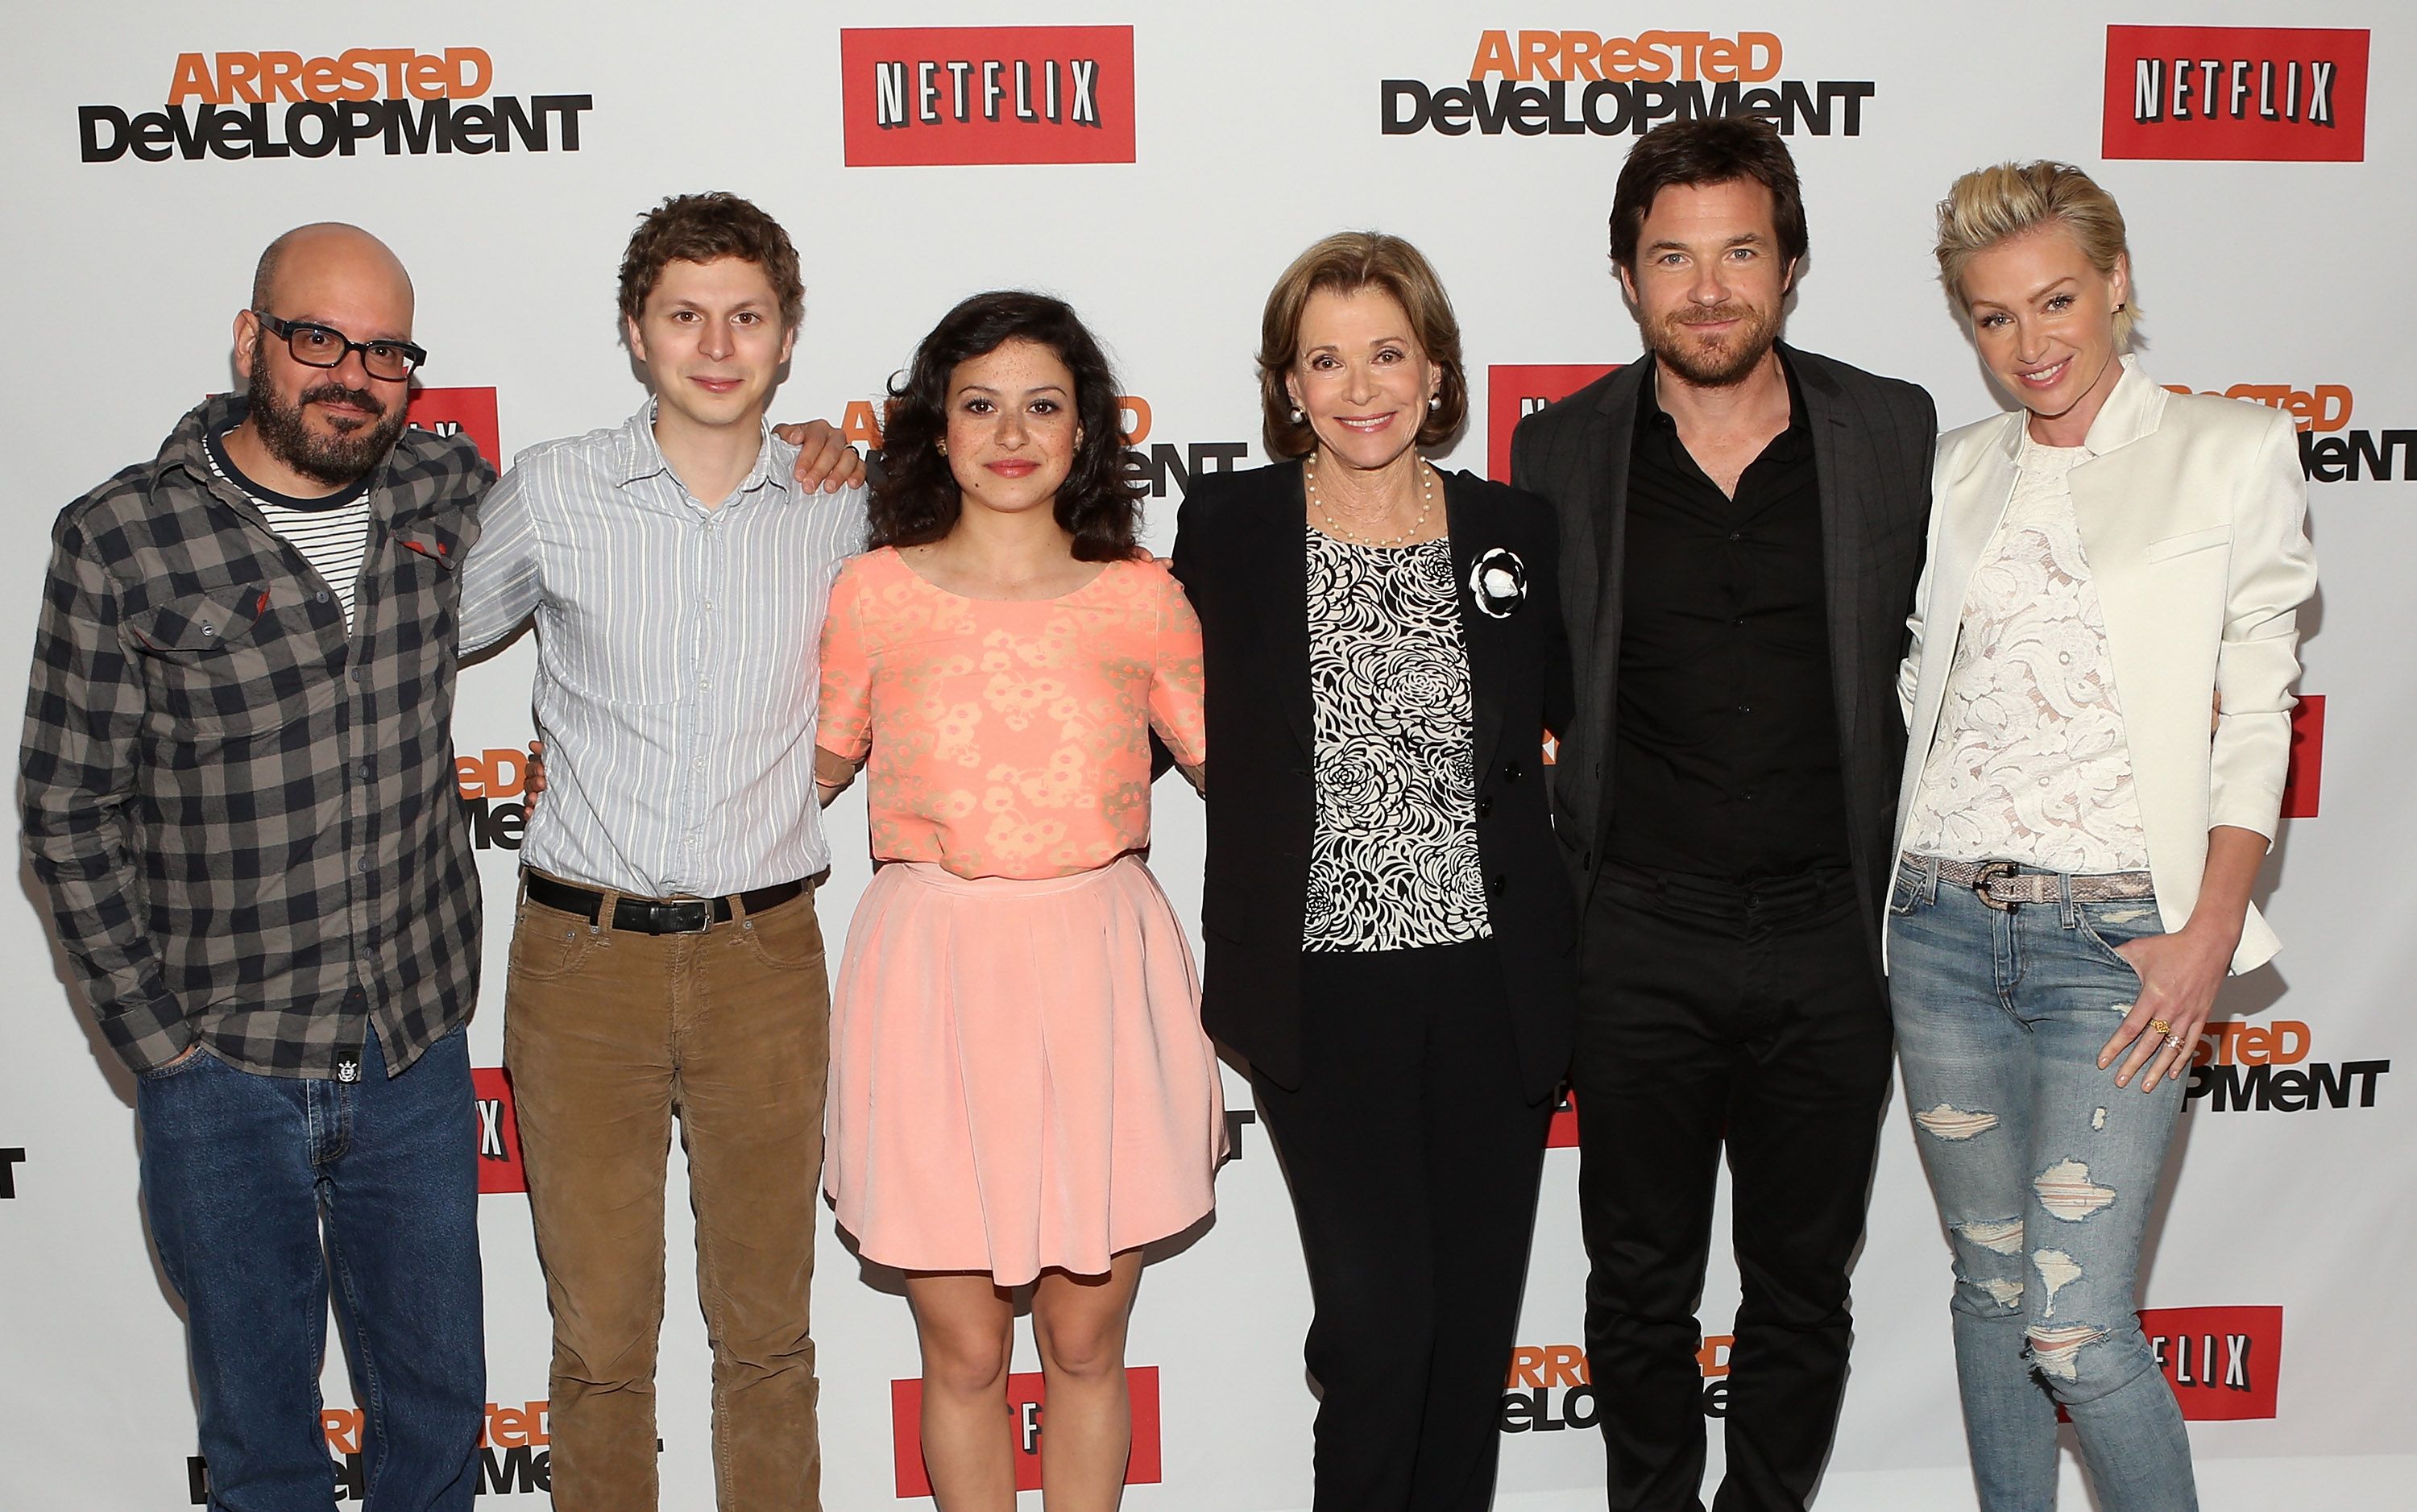 The Bluth Family reunites at the Arrested Development Season 4 press conference